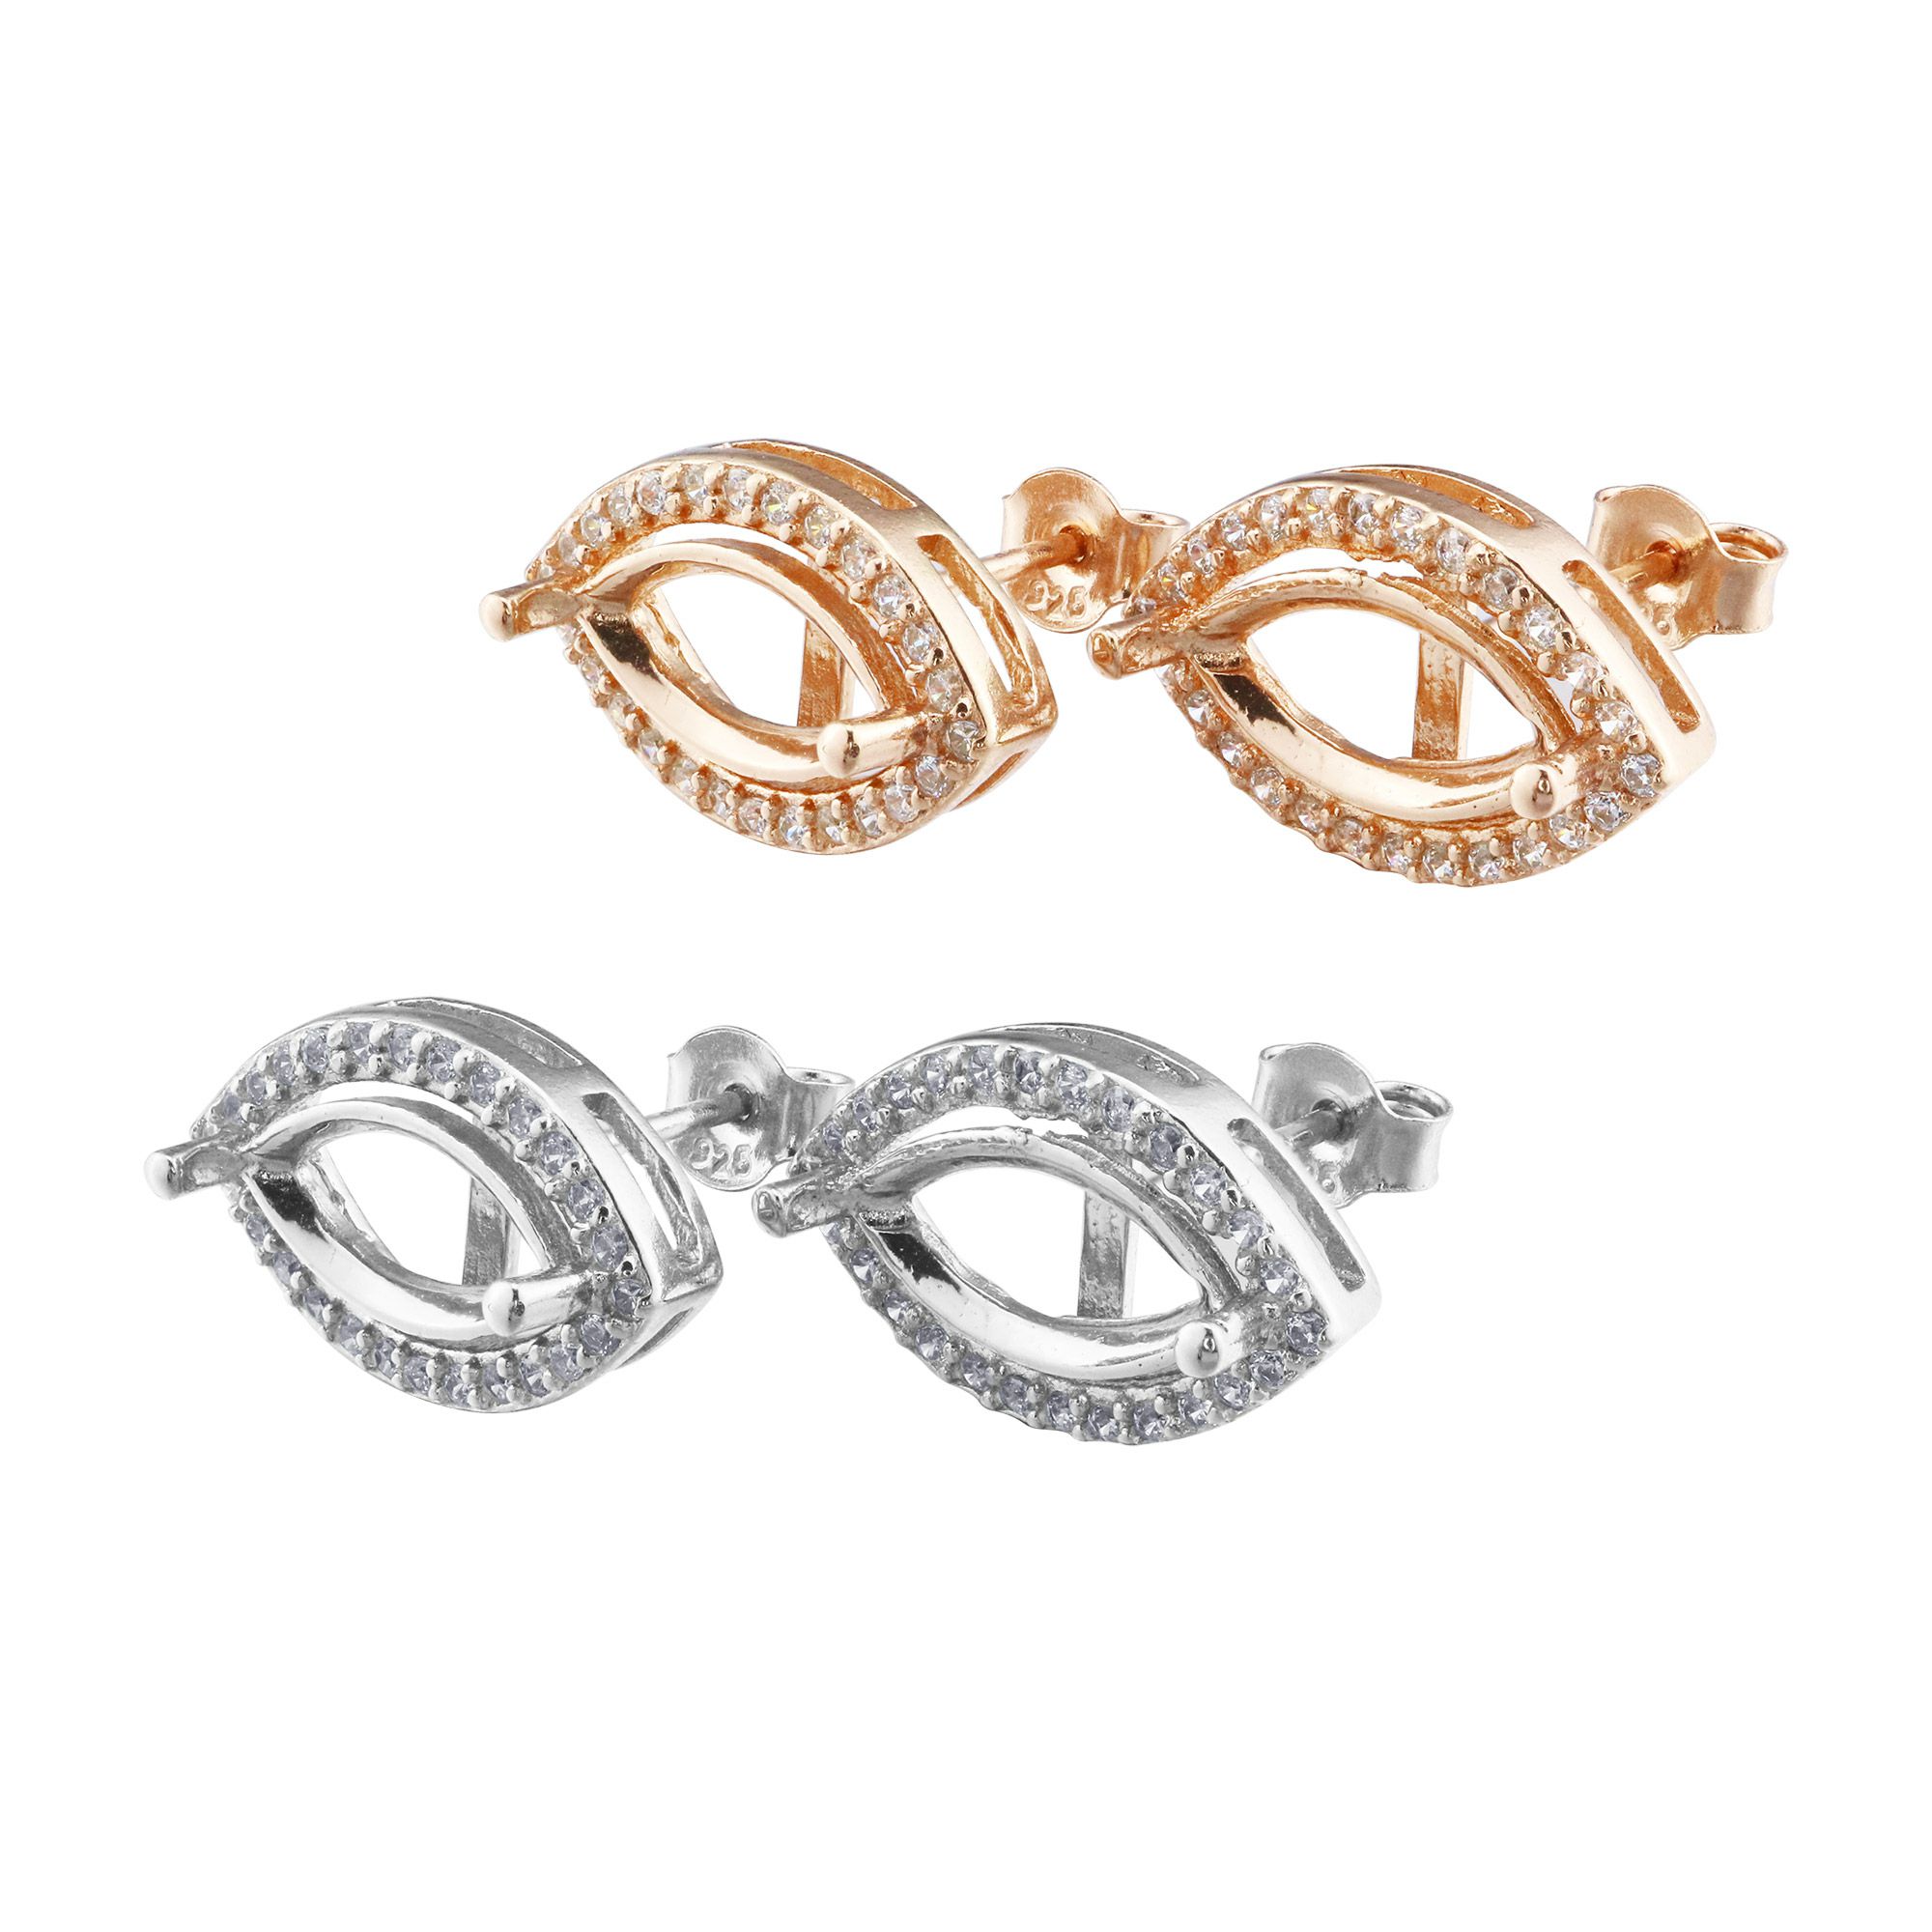 Halo Marquise Prong Studs Earrings Settings Solid 925 Sterling Silver Rose Gold Plated Earrings Bezel Gemstone DIY Supplies 1706072 - Click Image to Close